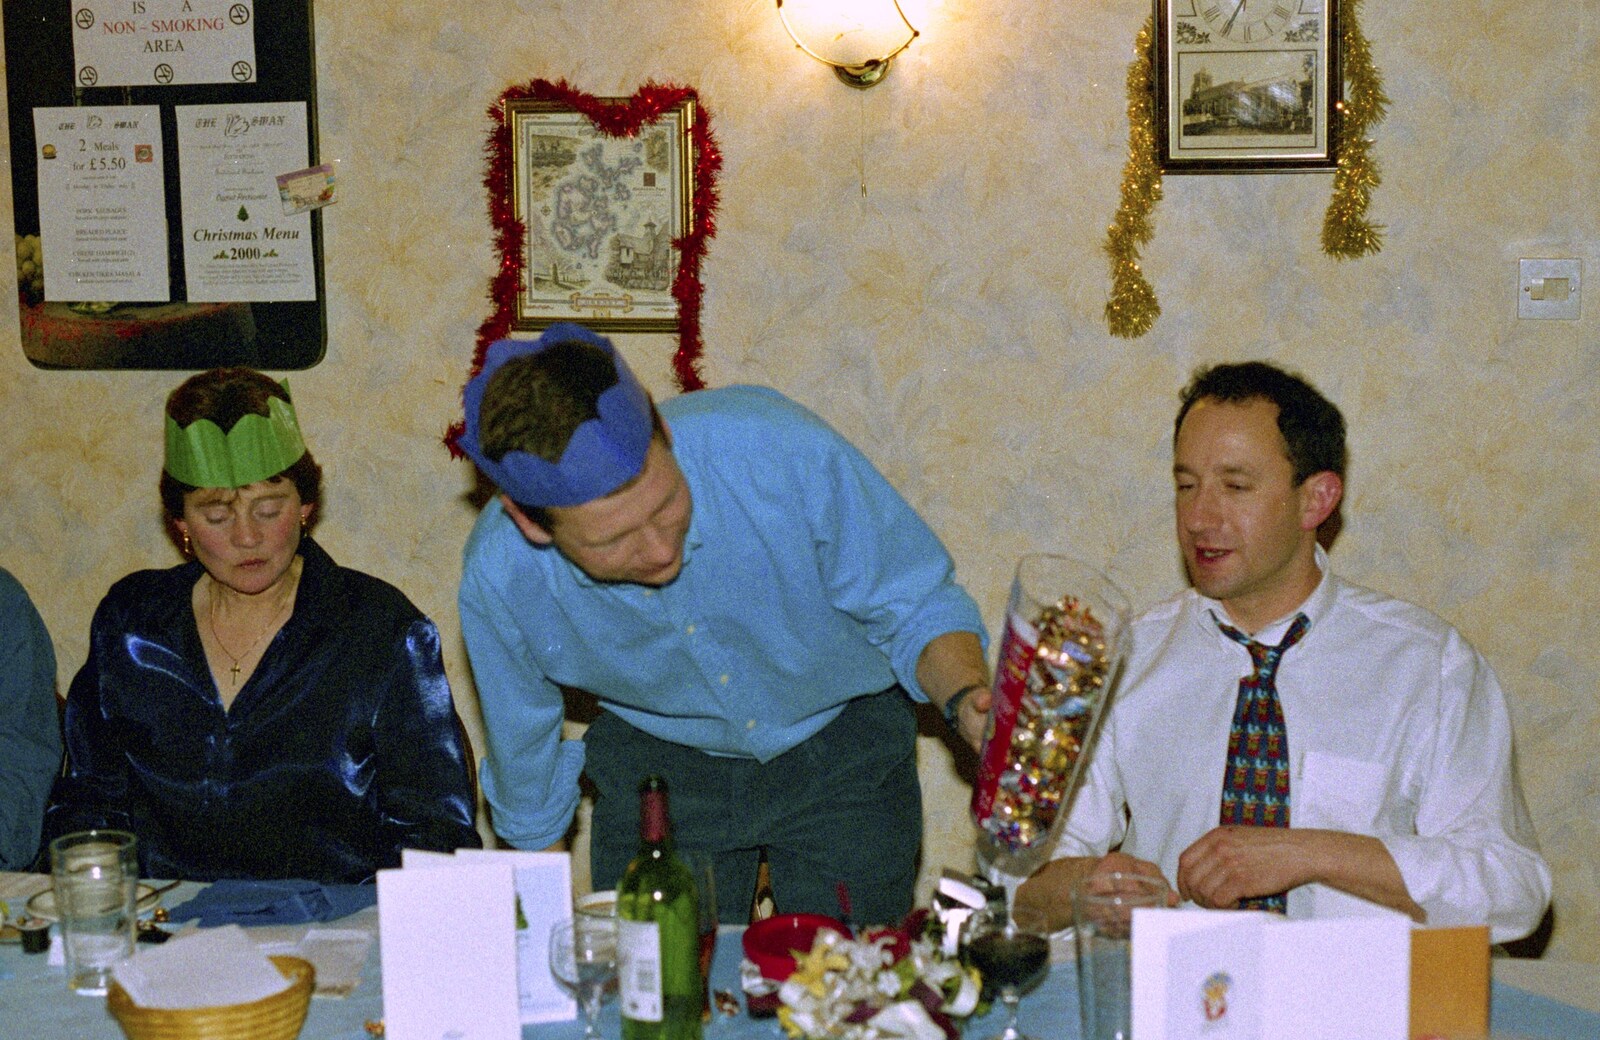 Apple offers some chocolates around from The BSCC Christmas Dinner, The Swan Inn, Brome, Suffolk - 8th December 2000